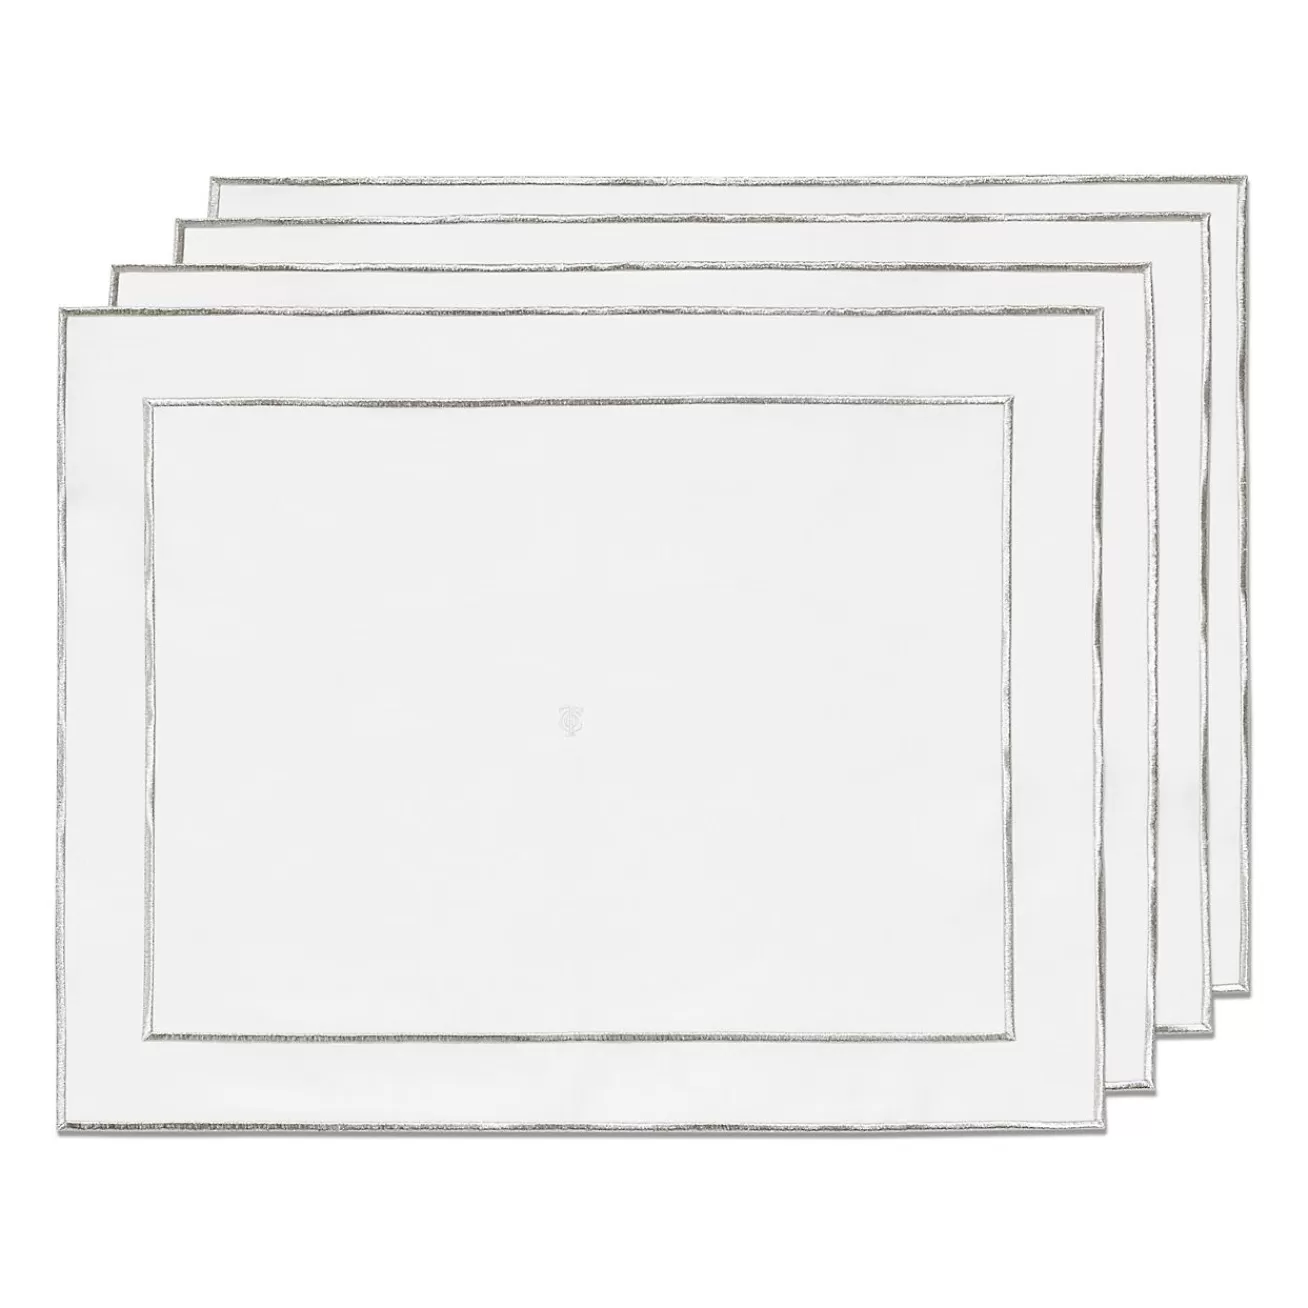 Tiffany & Co. Tiffany Home Essentials Embroidered Placemats in Linen, Set of Four | ^ Decor | Table Linens